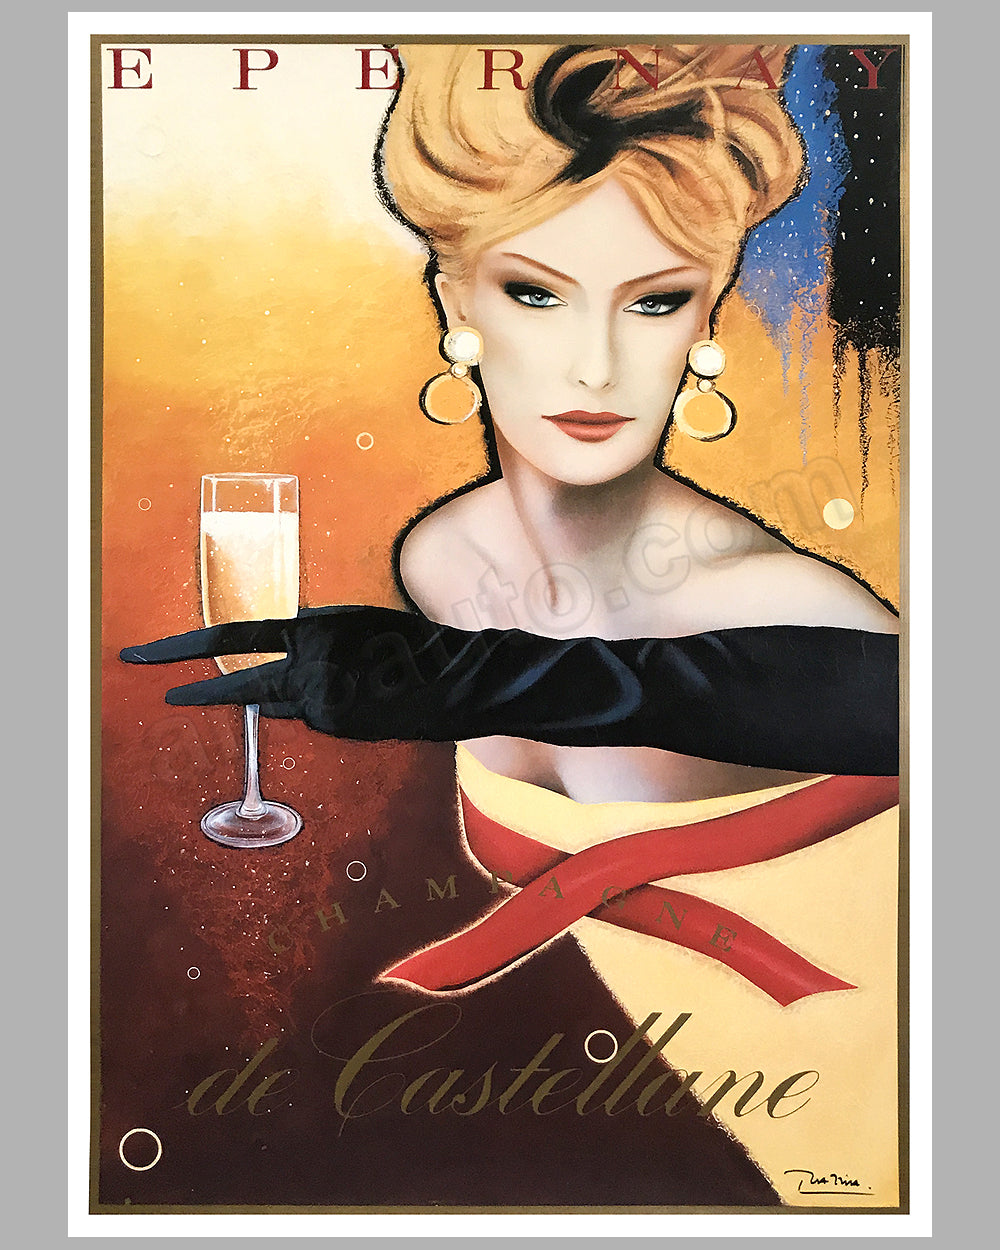 Champagne de Castellane large advertising poster by Razzia <p><em><span style="color: #ff2a00;"><strong>Temporarily Out of Stock</strong><br></span></em>$625.00</p>